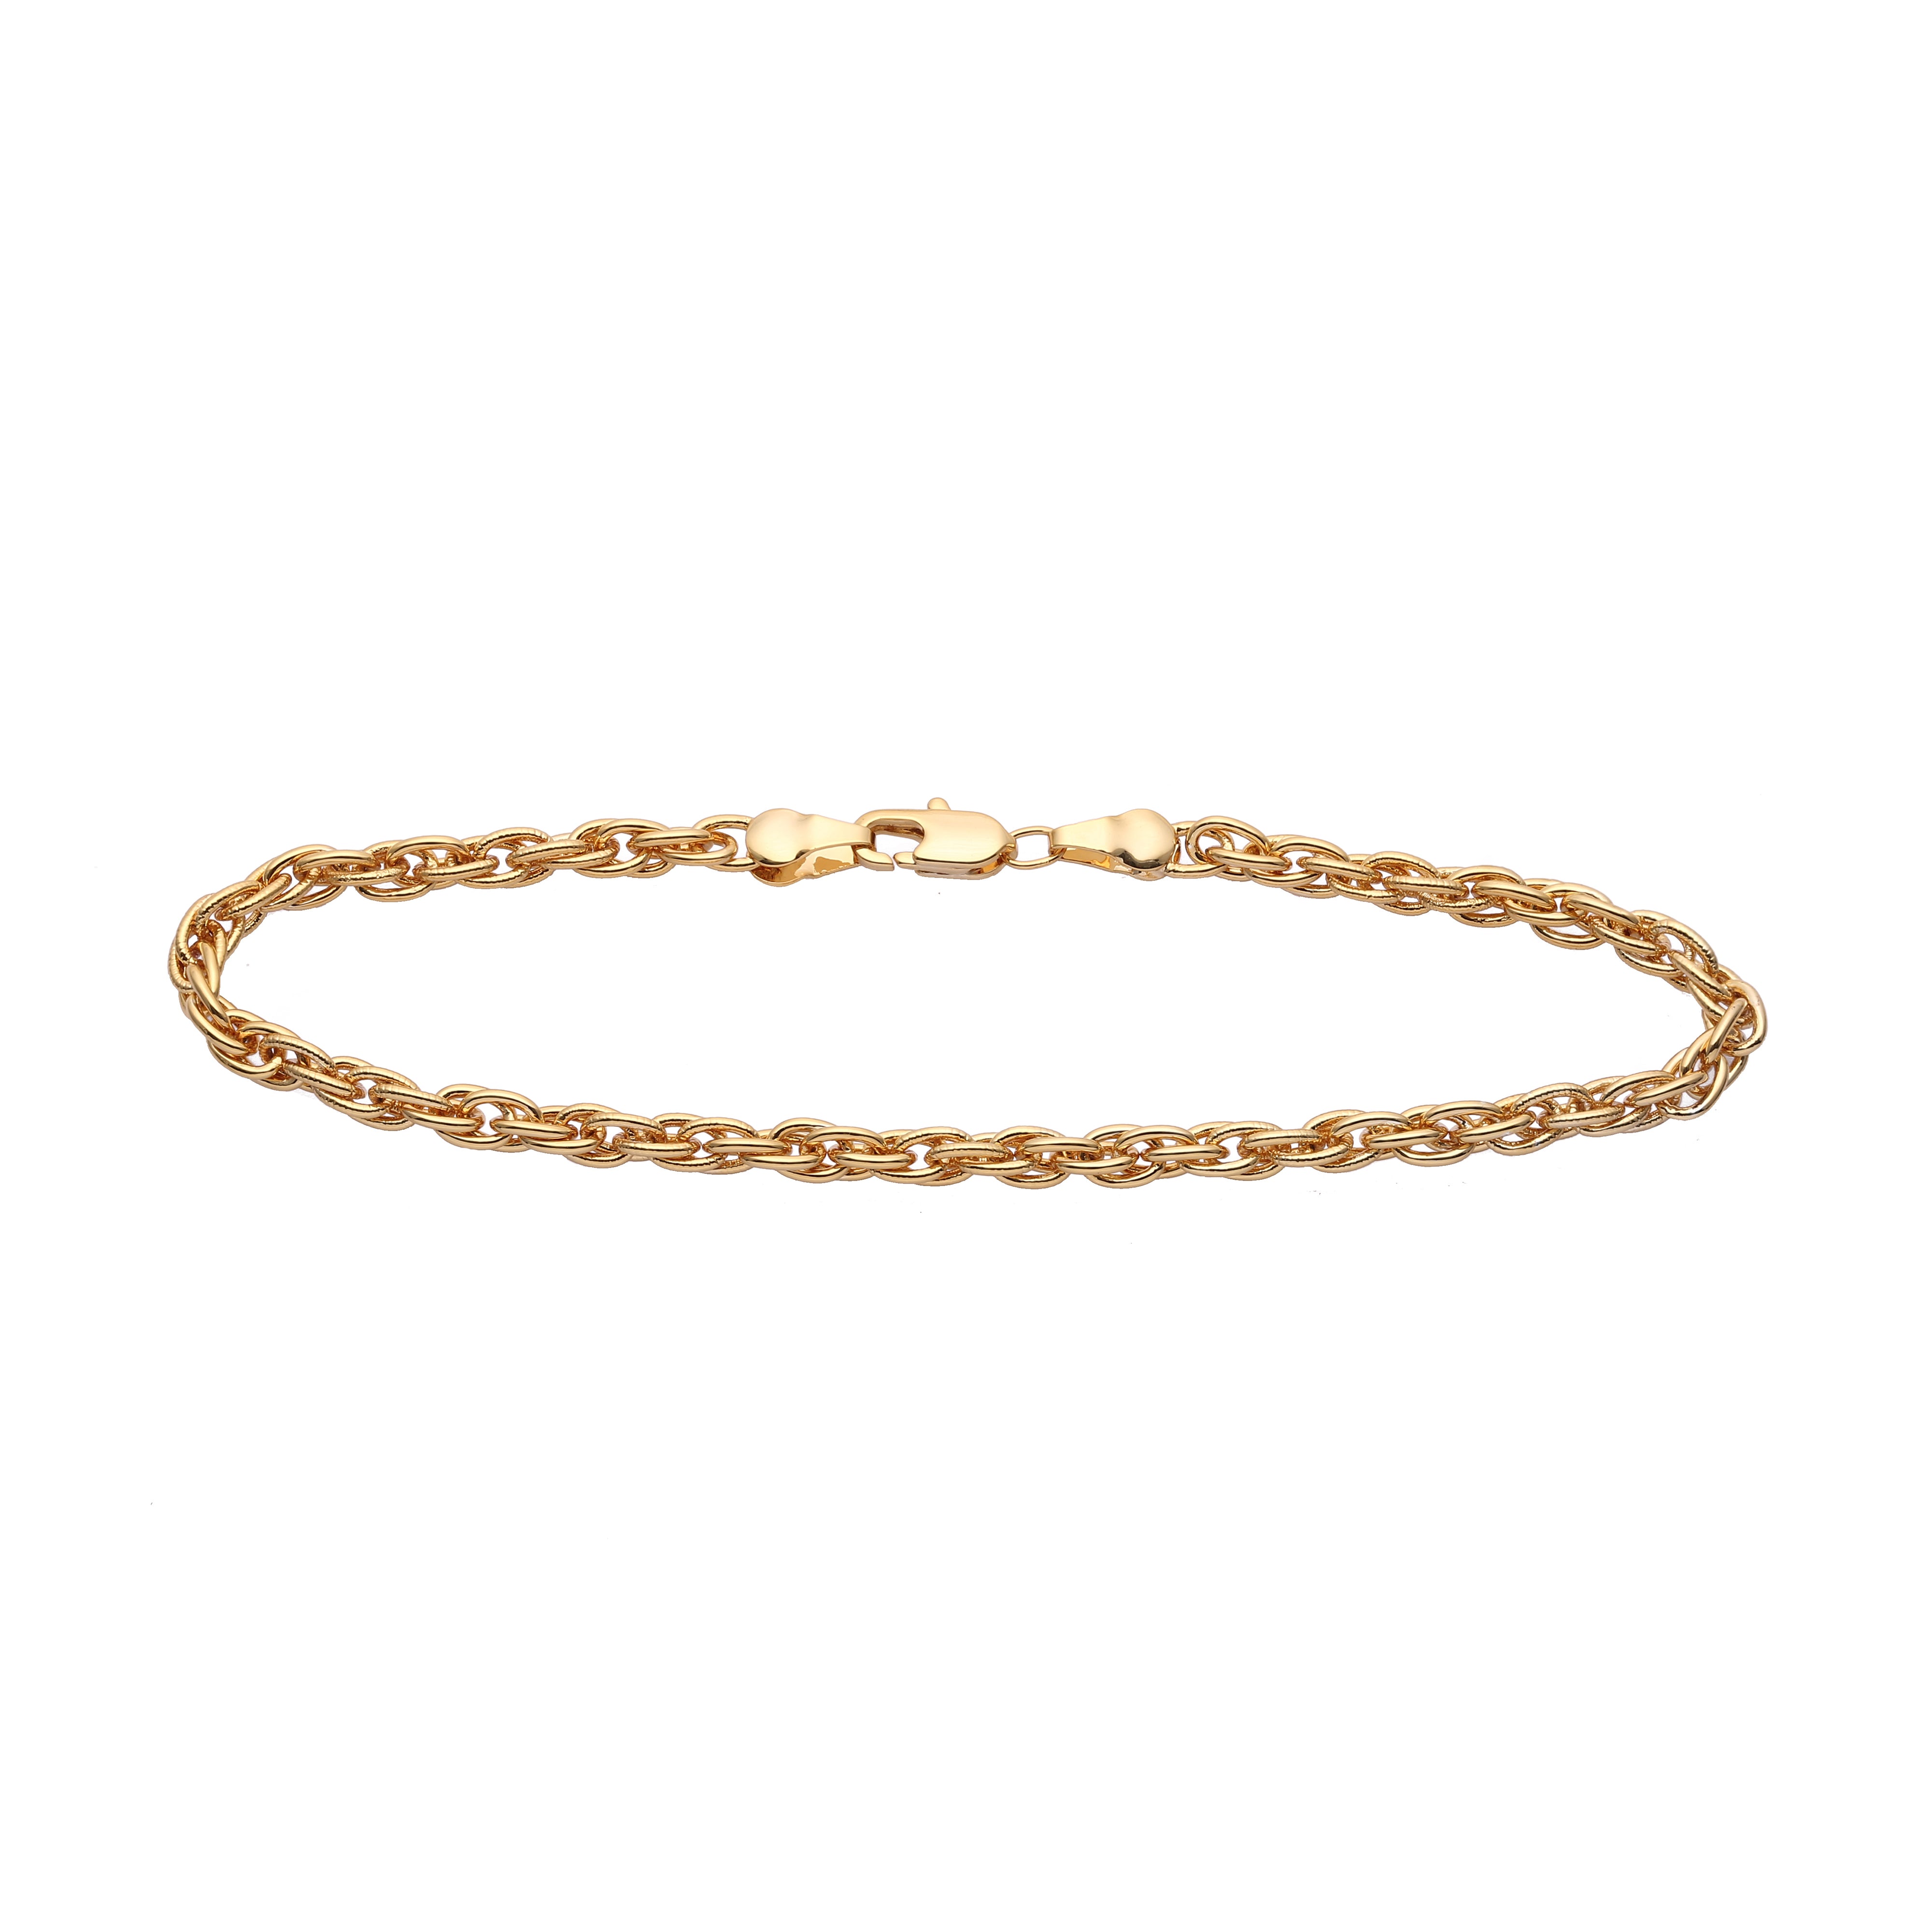 Rope link hammered chains plated in 14K Gold, Rose Gold